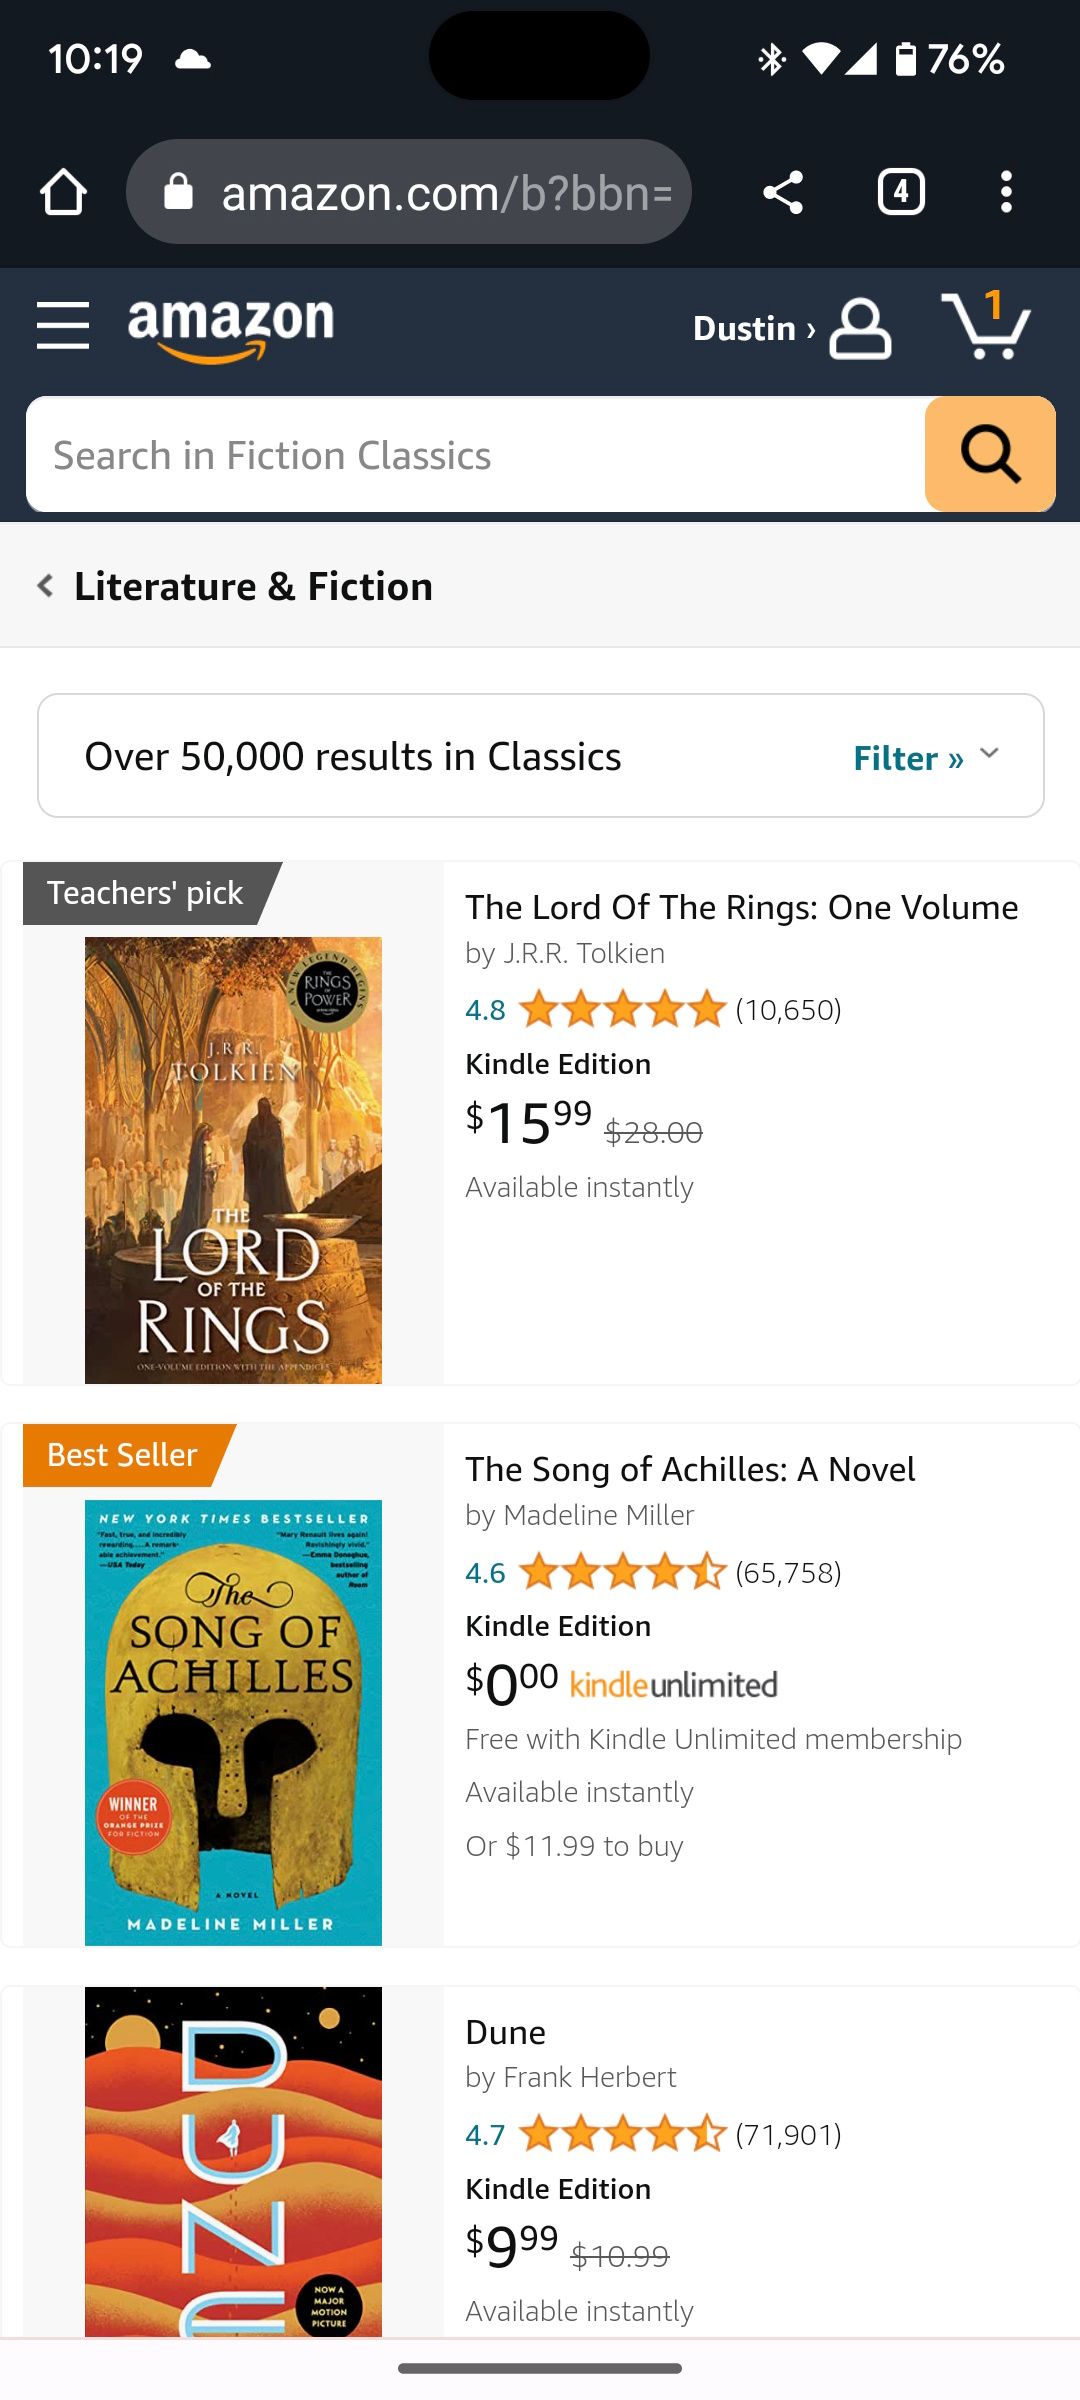 Browsing classic literature on Amazon's Kindle section